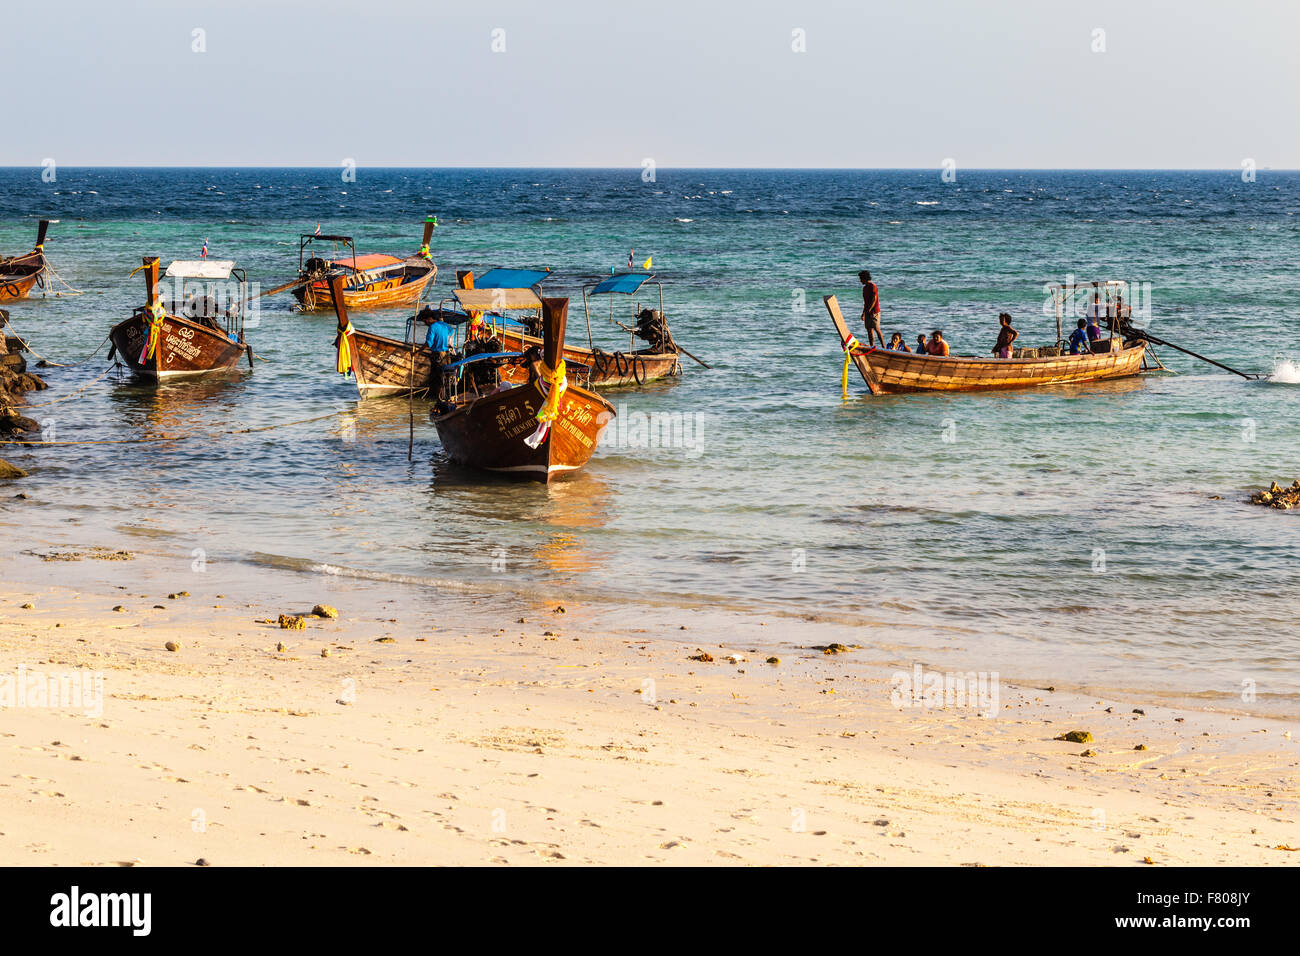 several long tail boats floating in a calm tropical sea Stock Photo